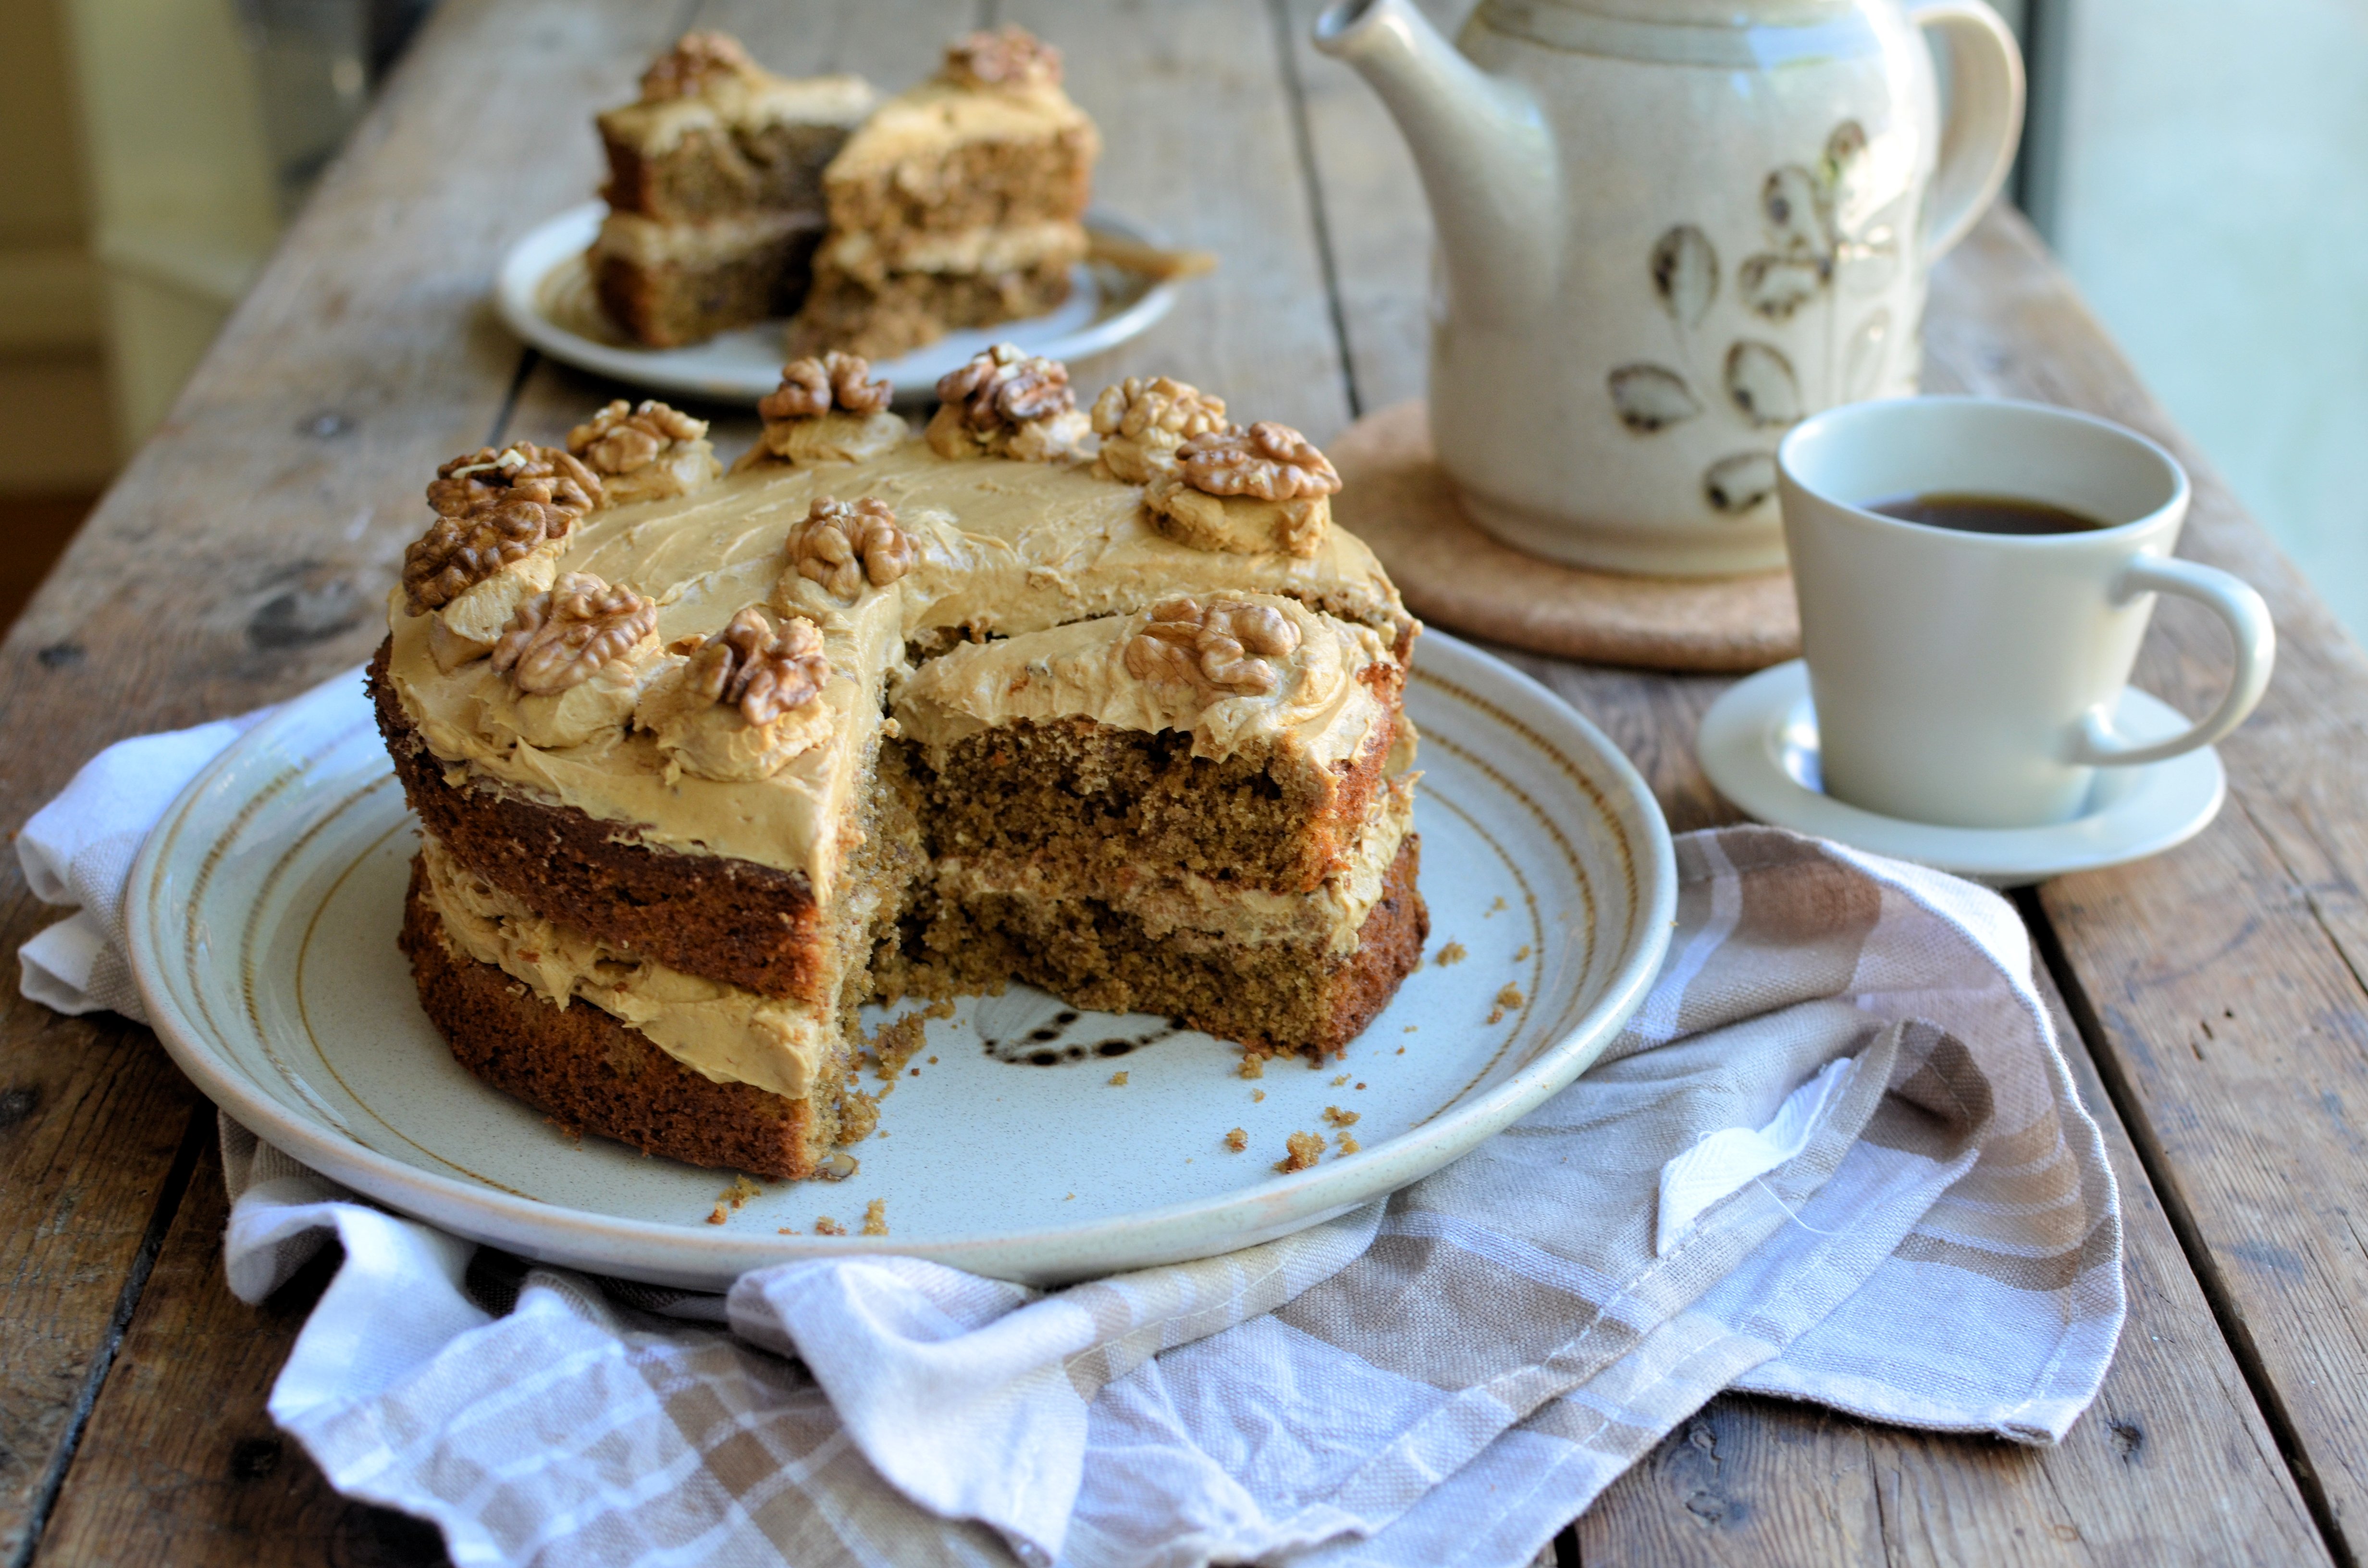 Sour-Cream Coffee Cake Recipe - NYT Cooking